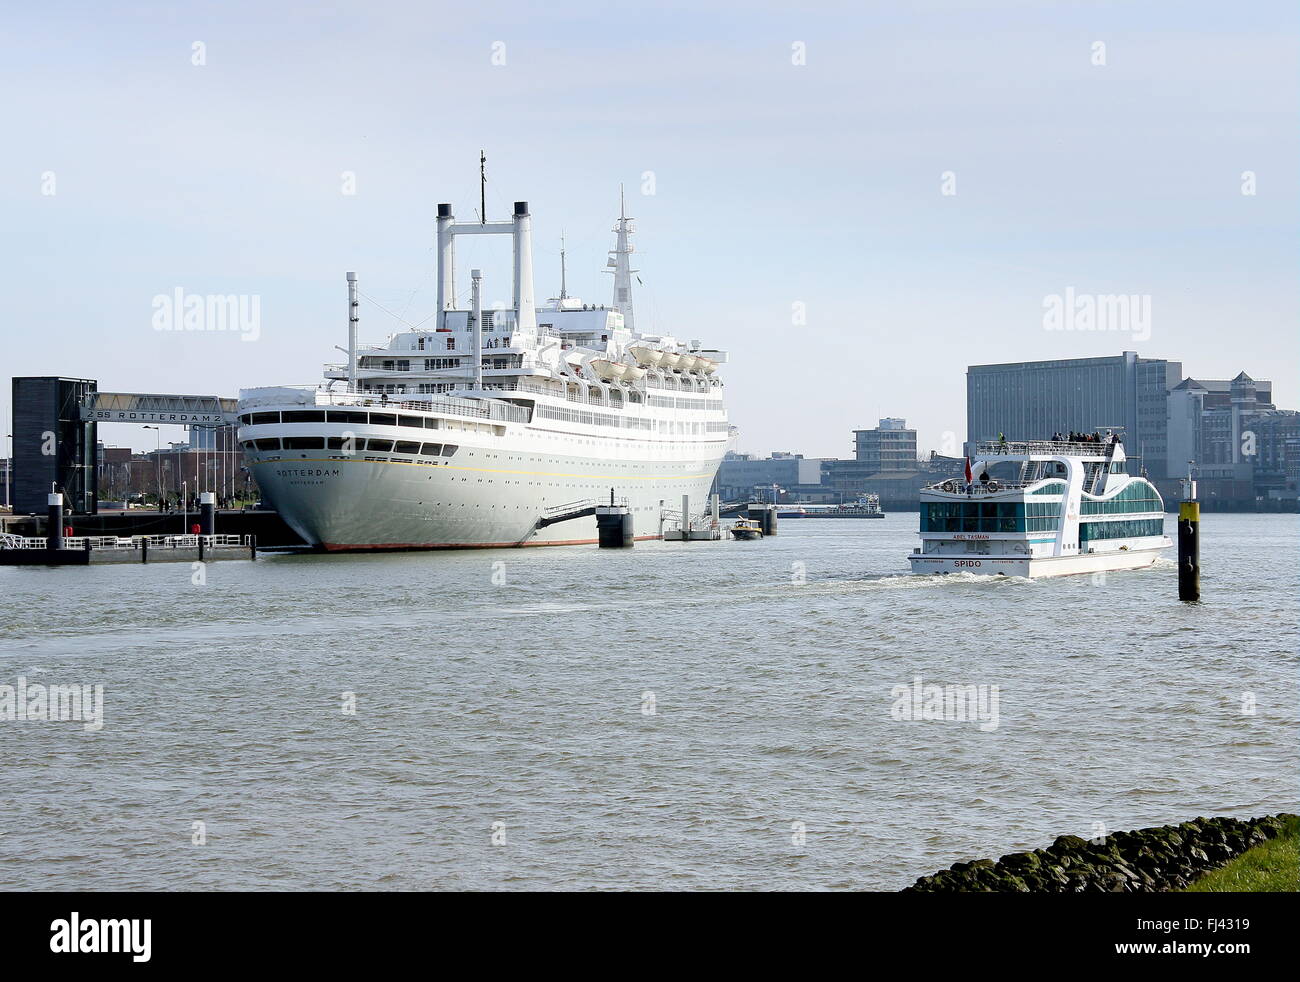 Hotel Ship S.S. Rotterdam, former ocean liner and cruise ship, moored in Rotterdam, Netherlands, Derde Katendrechtse Hoofd quay Stock Photo